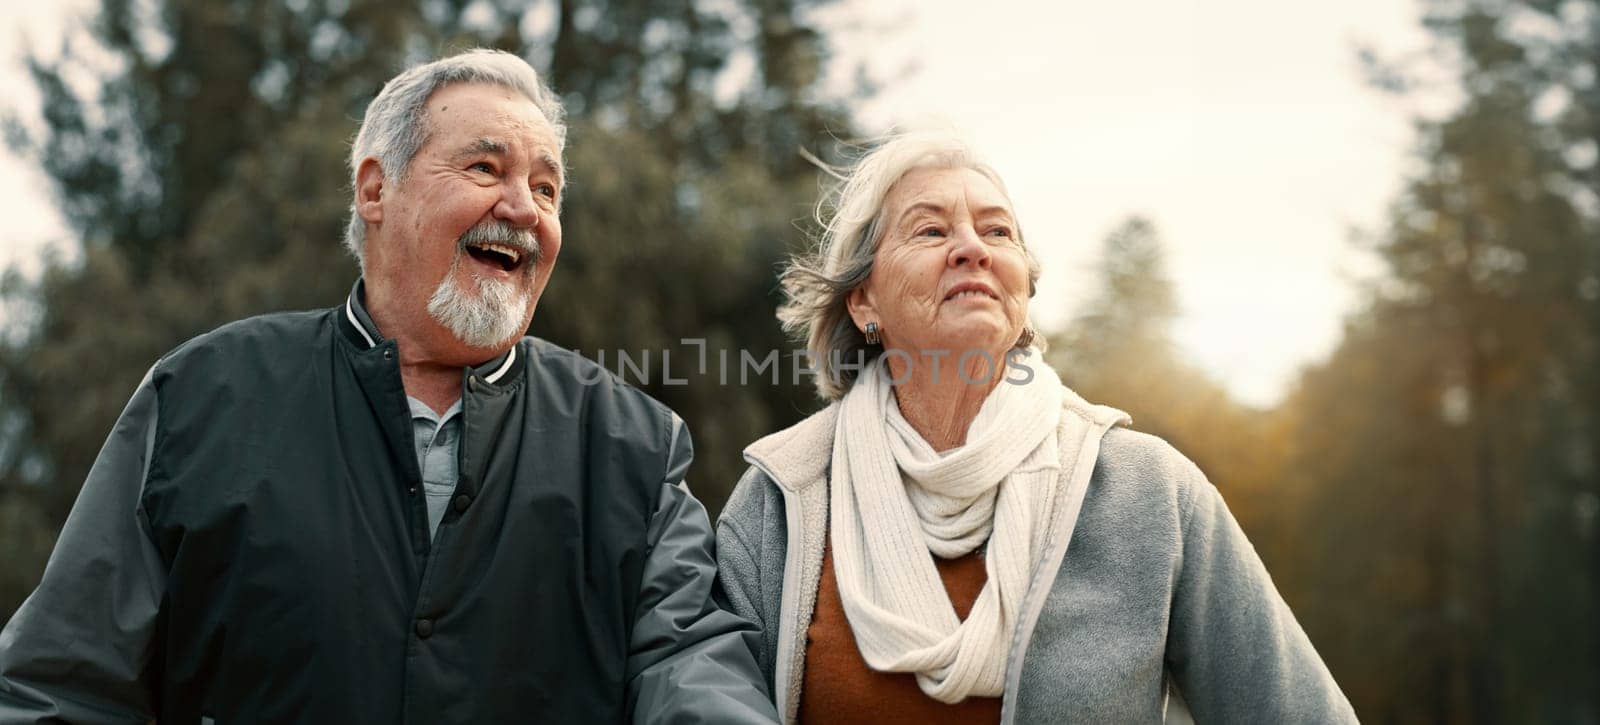 Love, smile and a senior couple walking outdoor in a park together for a romantic date during retirement. Happy, care or excited with an elderly man and woman bonding in a garden for romance by YuriArcurs